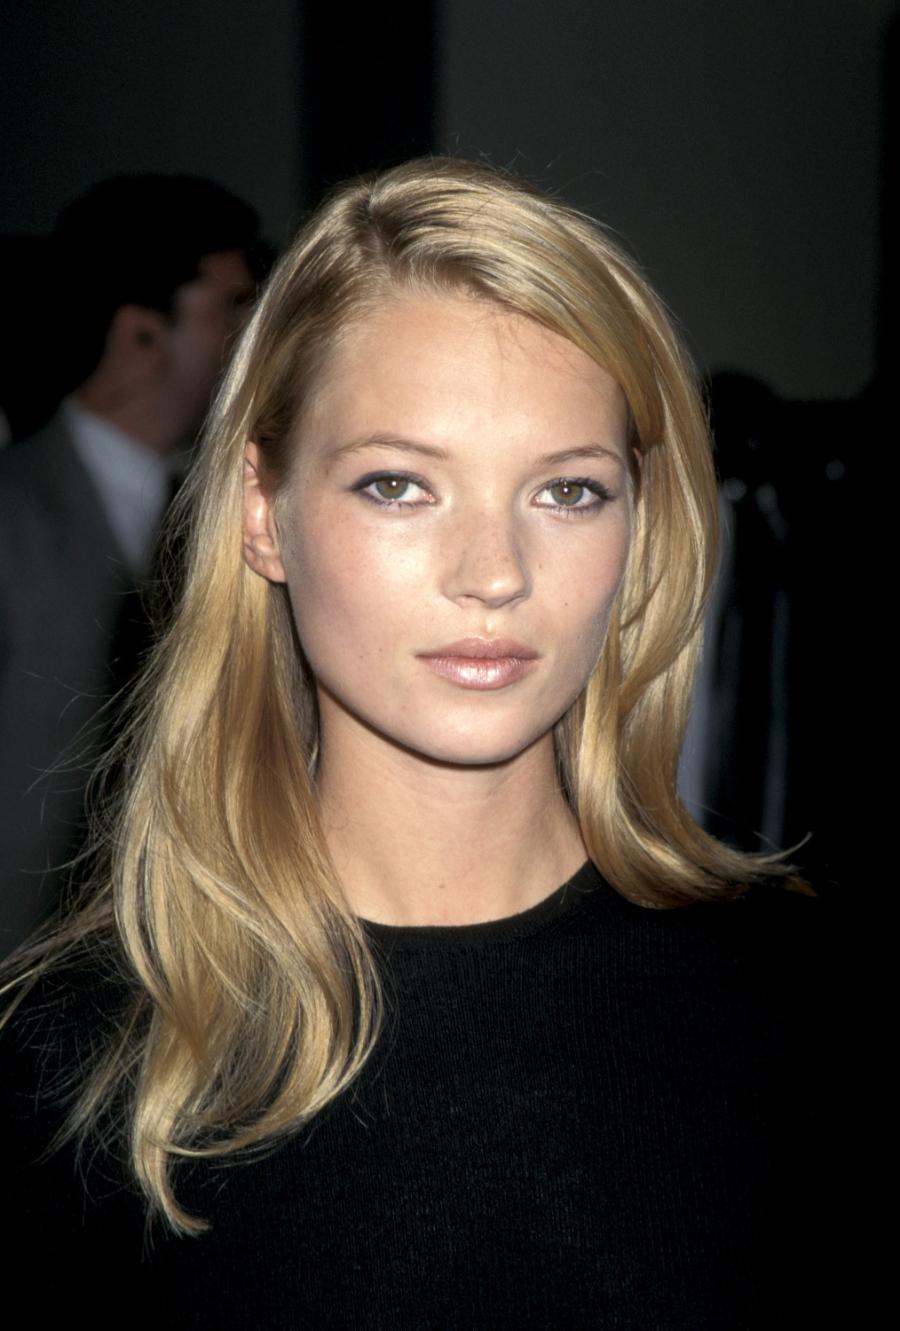 Kate Moss, 1995 (Fot. Jim Smeal/Ron Galella Collection/Getty Images)